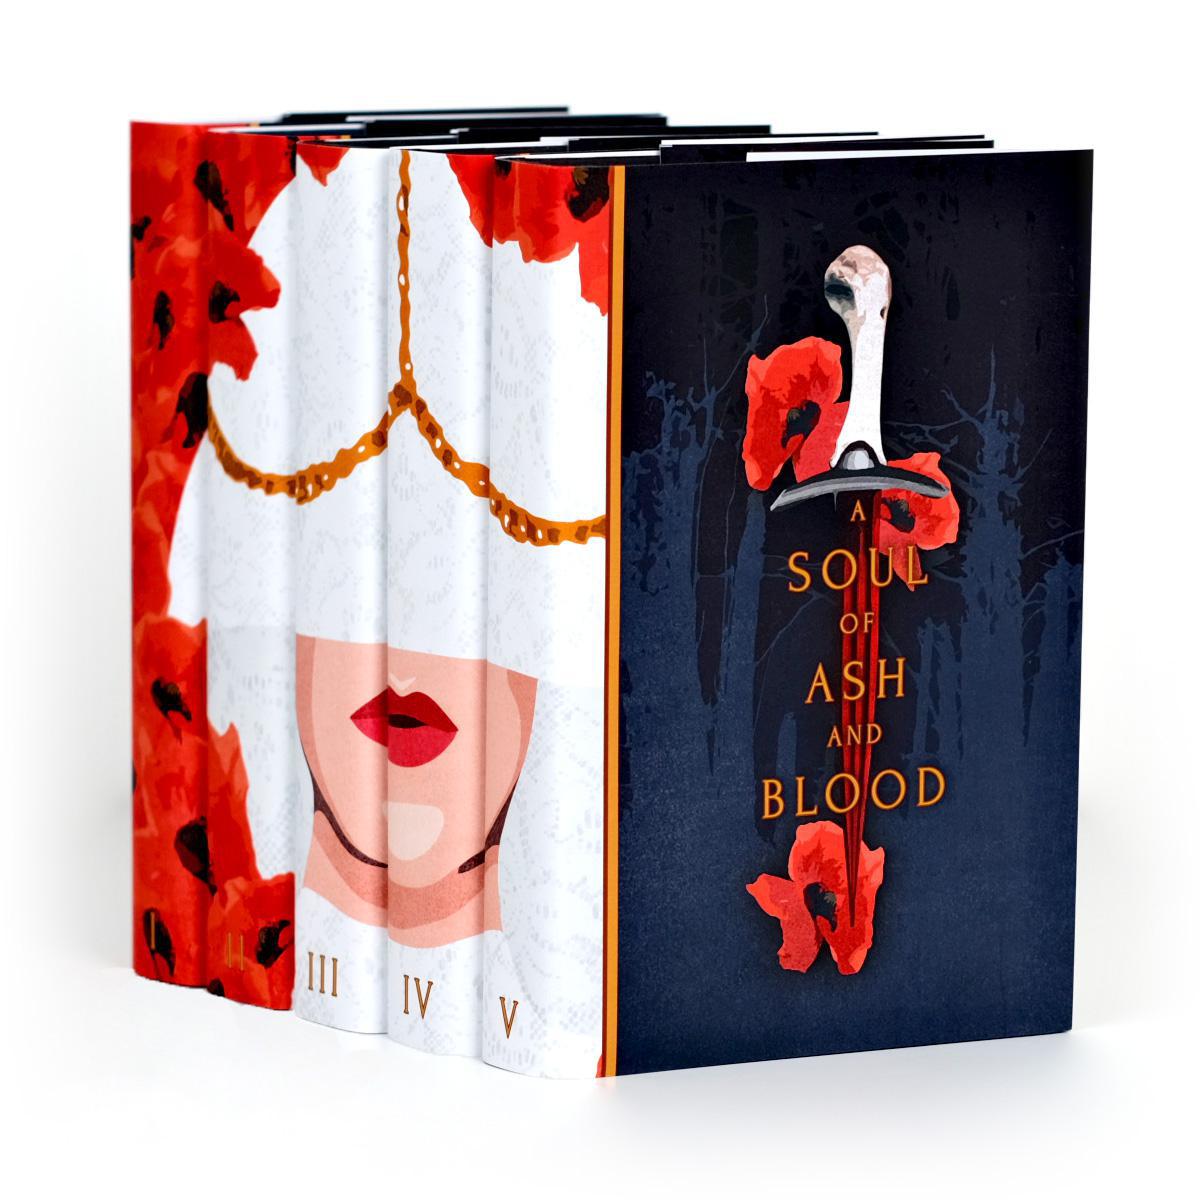 Customized Blood and Ash: A Soul of Ash and Blood - Single Book